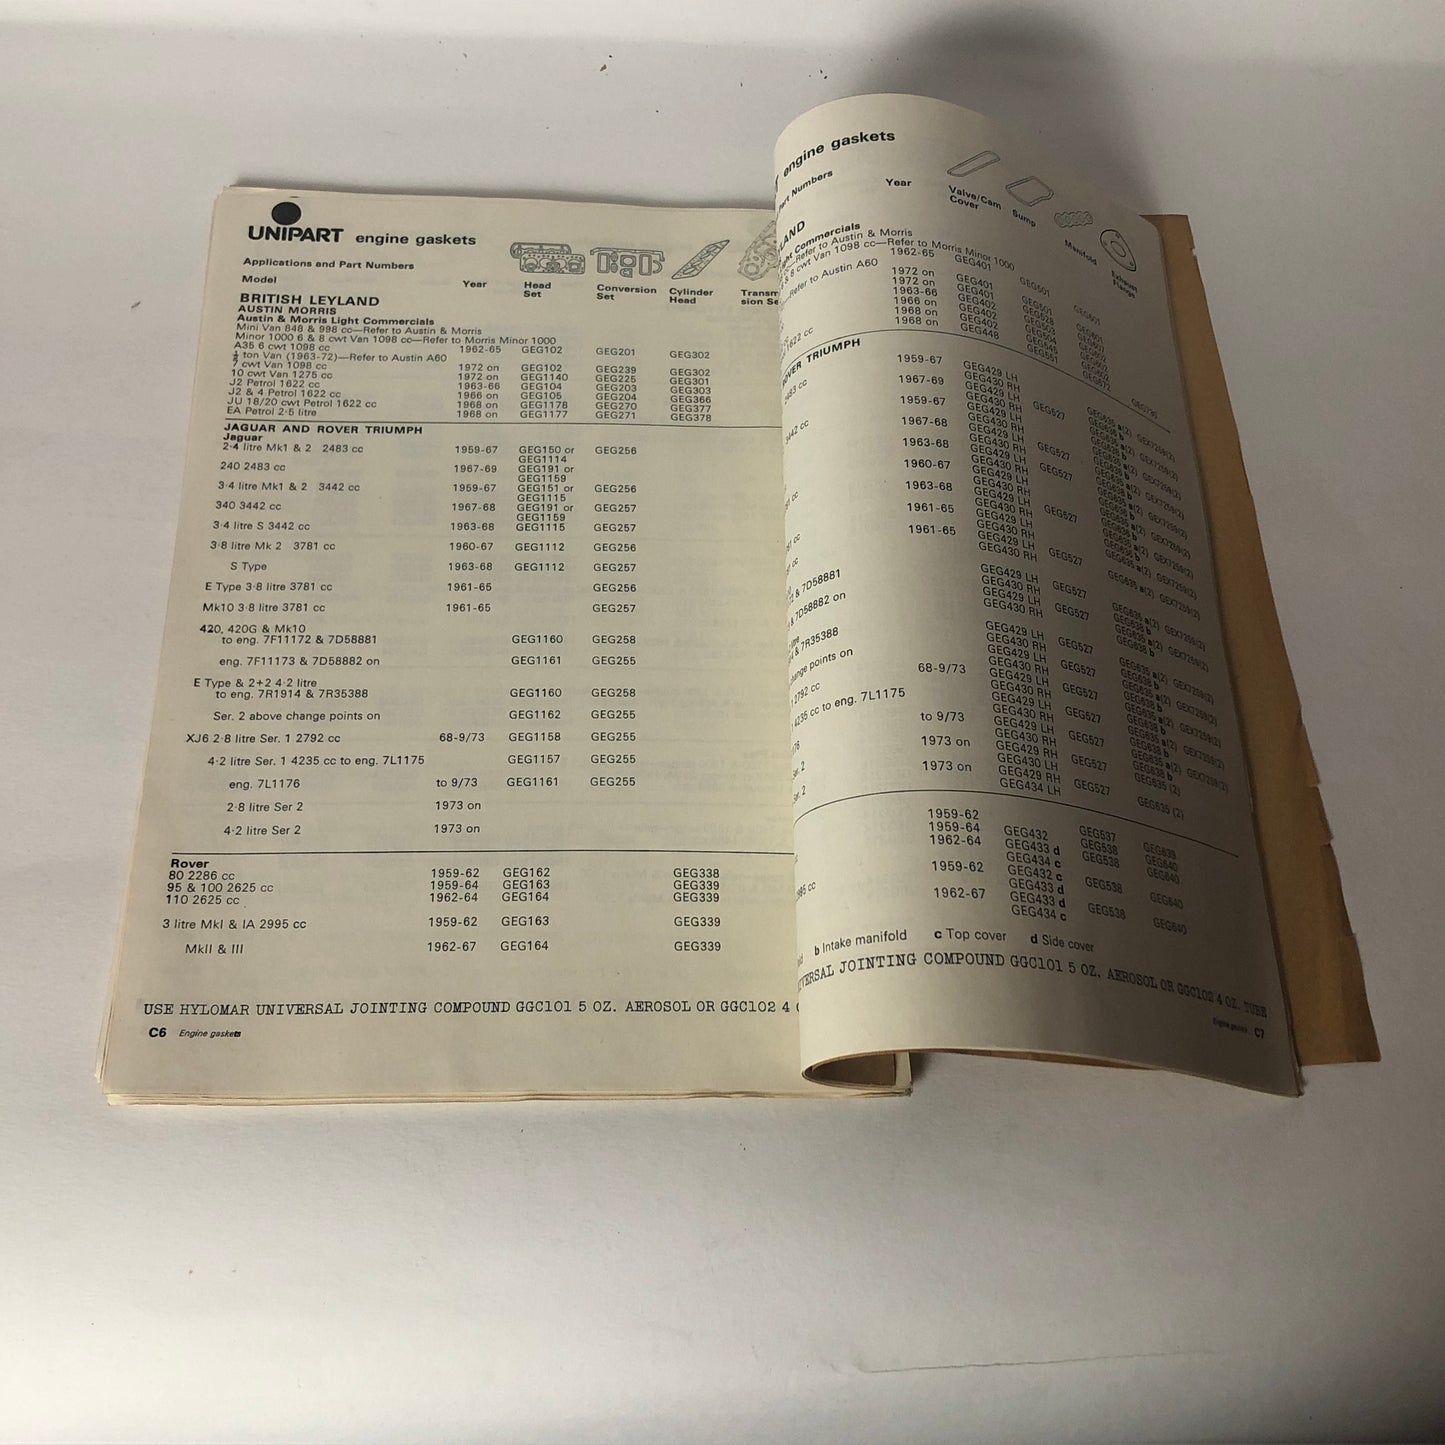 Leyland Innocenti, Spare Parts Catalog and Price List Unipart Year 1973 n.198 Year 1973